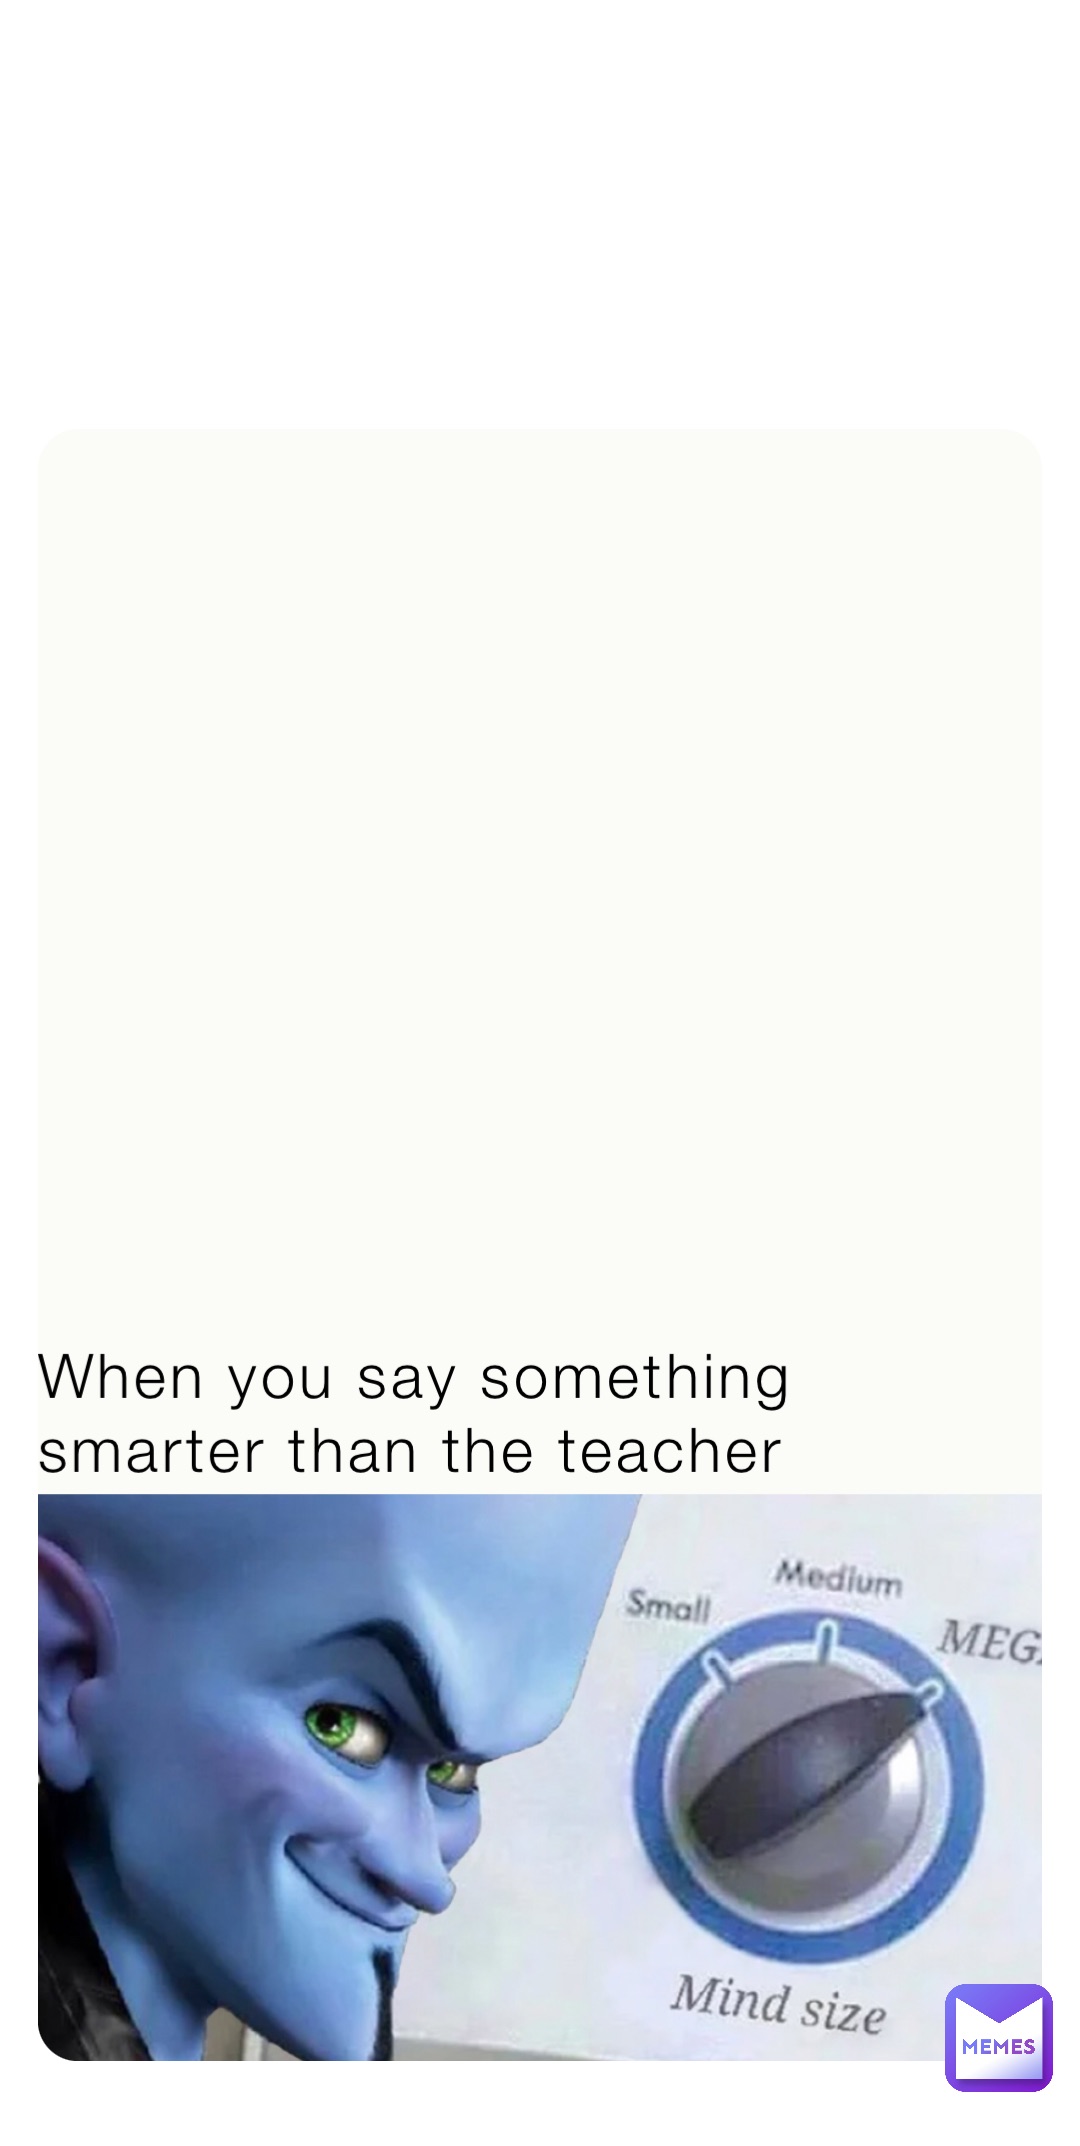 When you say something smarter than the teacher